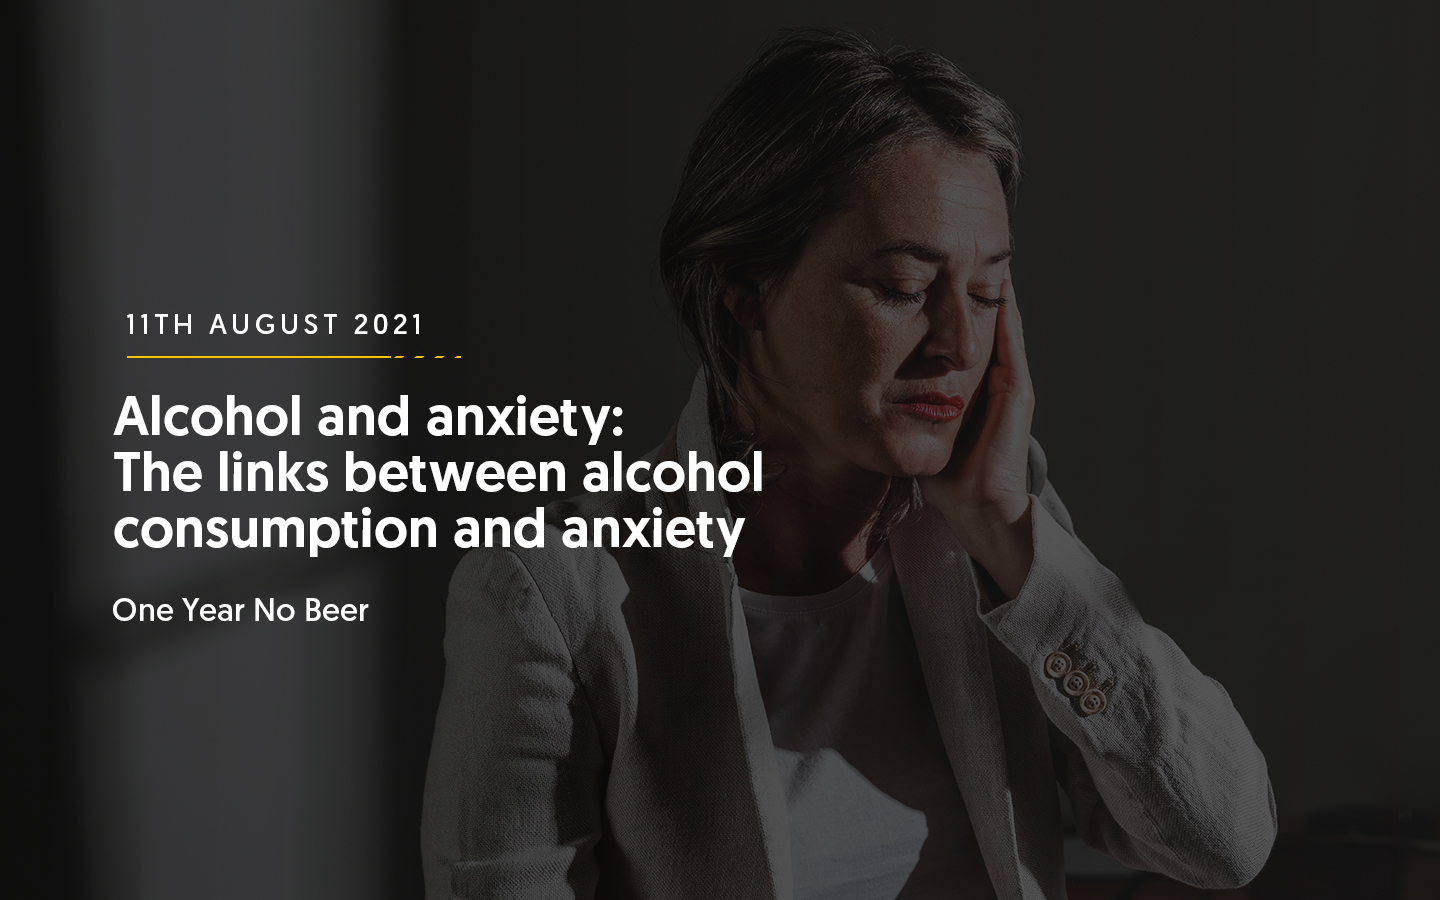 Alcohol and anxiety: The links between alcohol consumption and anxiety